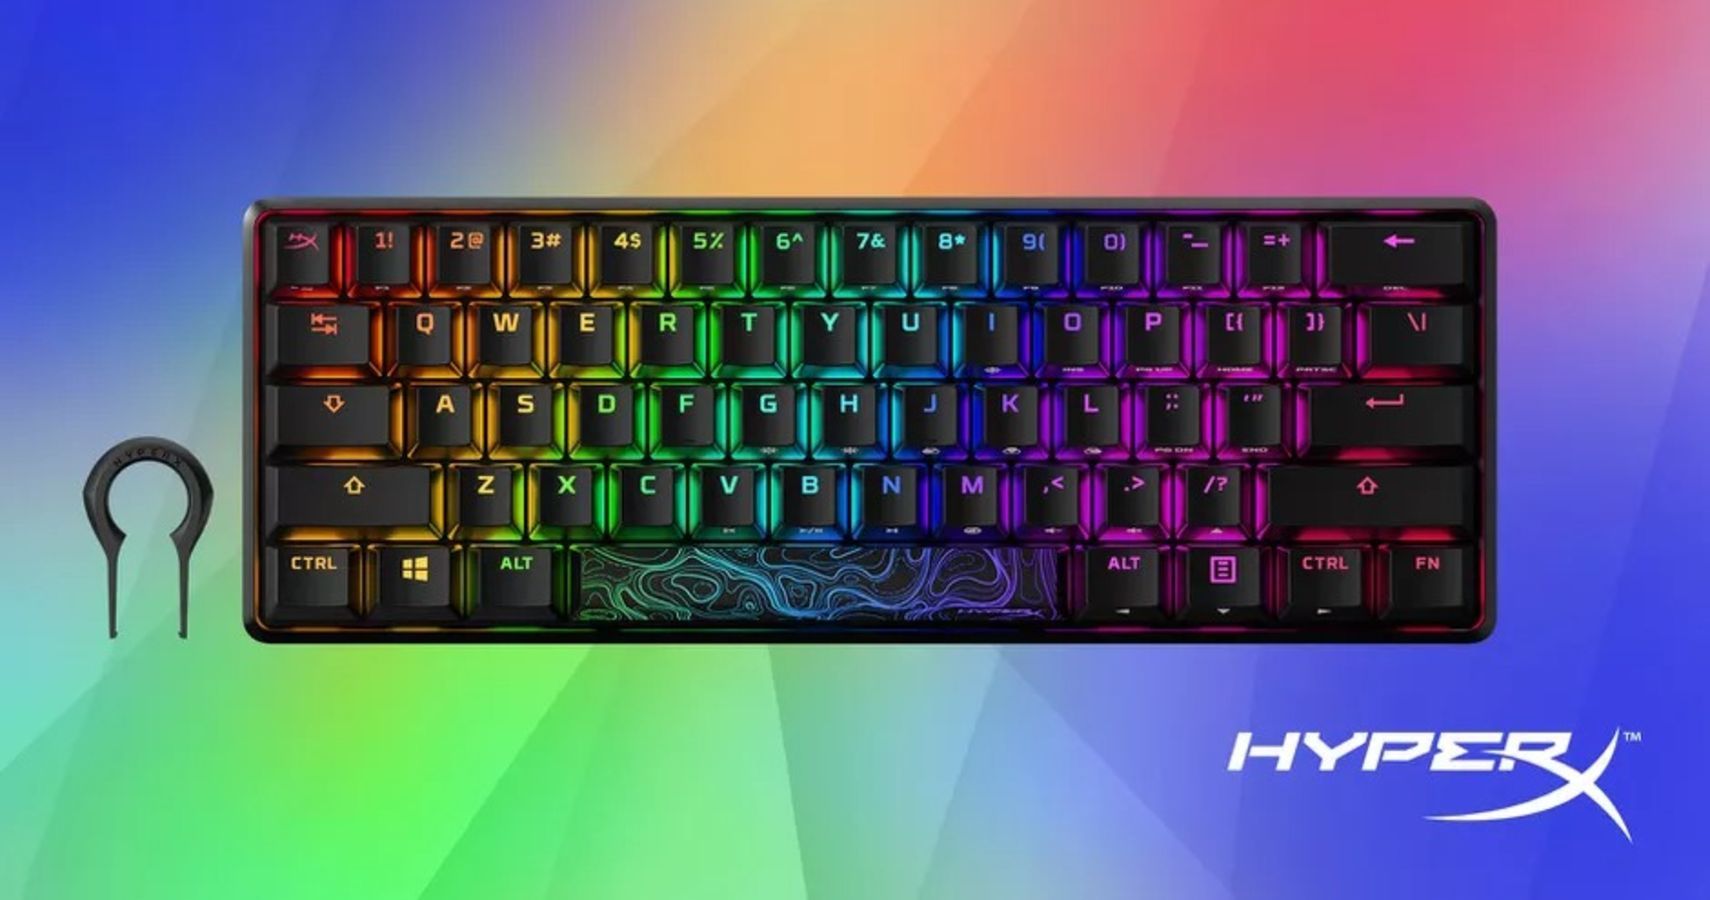 opwinding Boren Ontdekking CES 2021: HyperX Debuts New Product Lineup, Includes Its First 60% Gaming  Keyboard